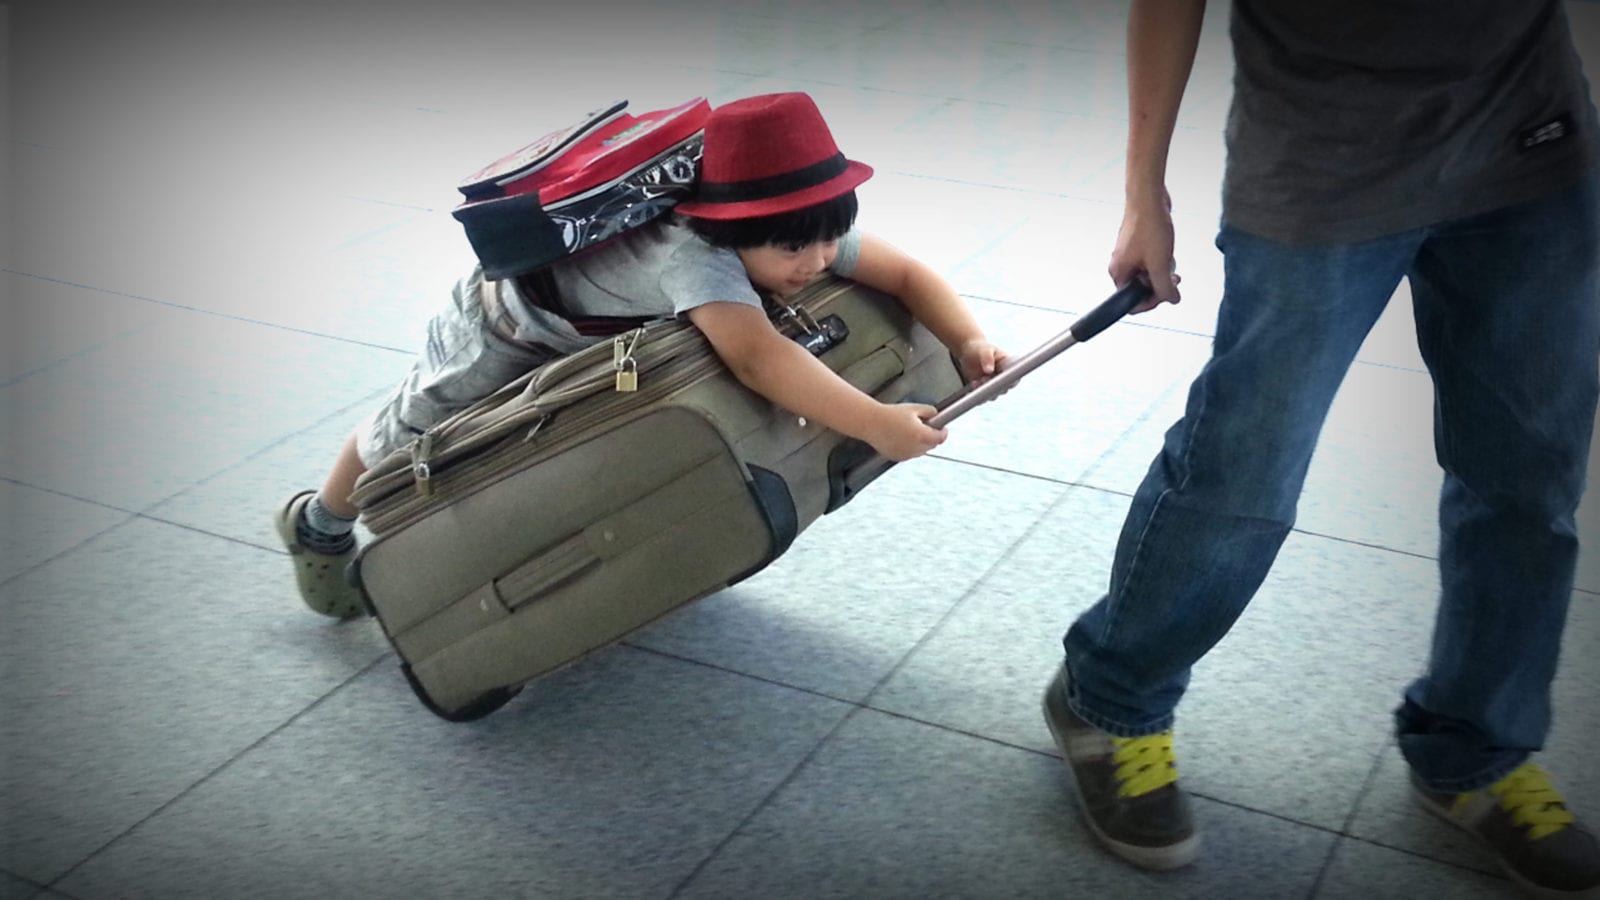 child wearing backpack riding on suitcase